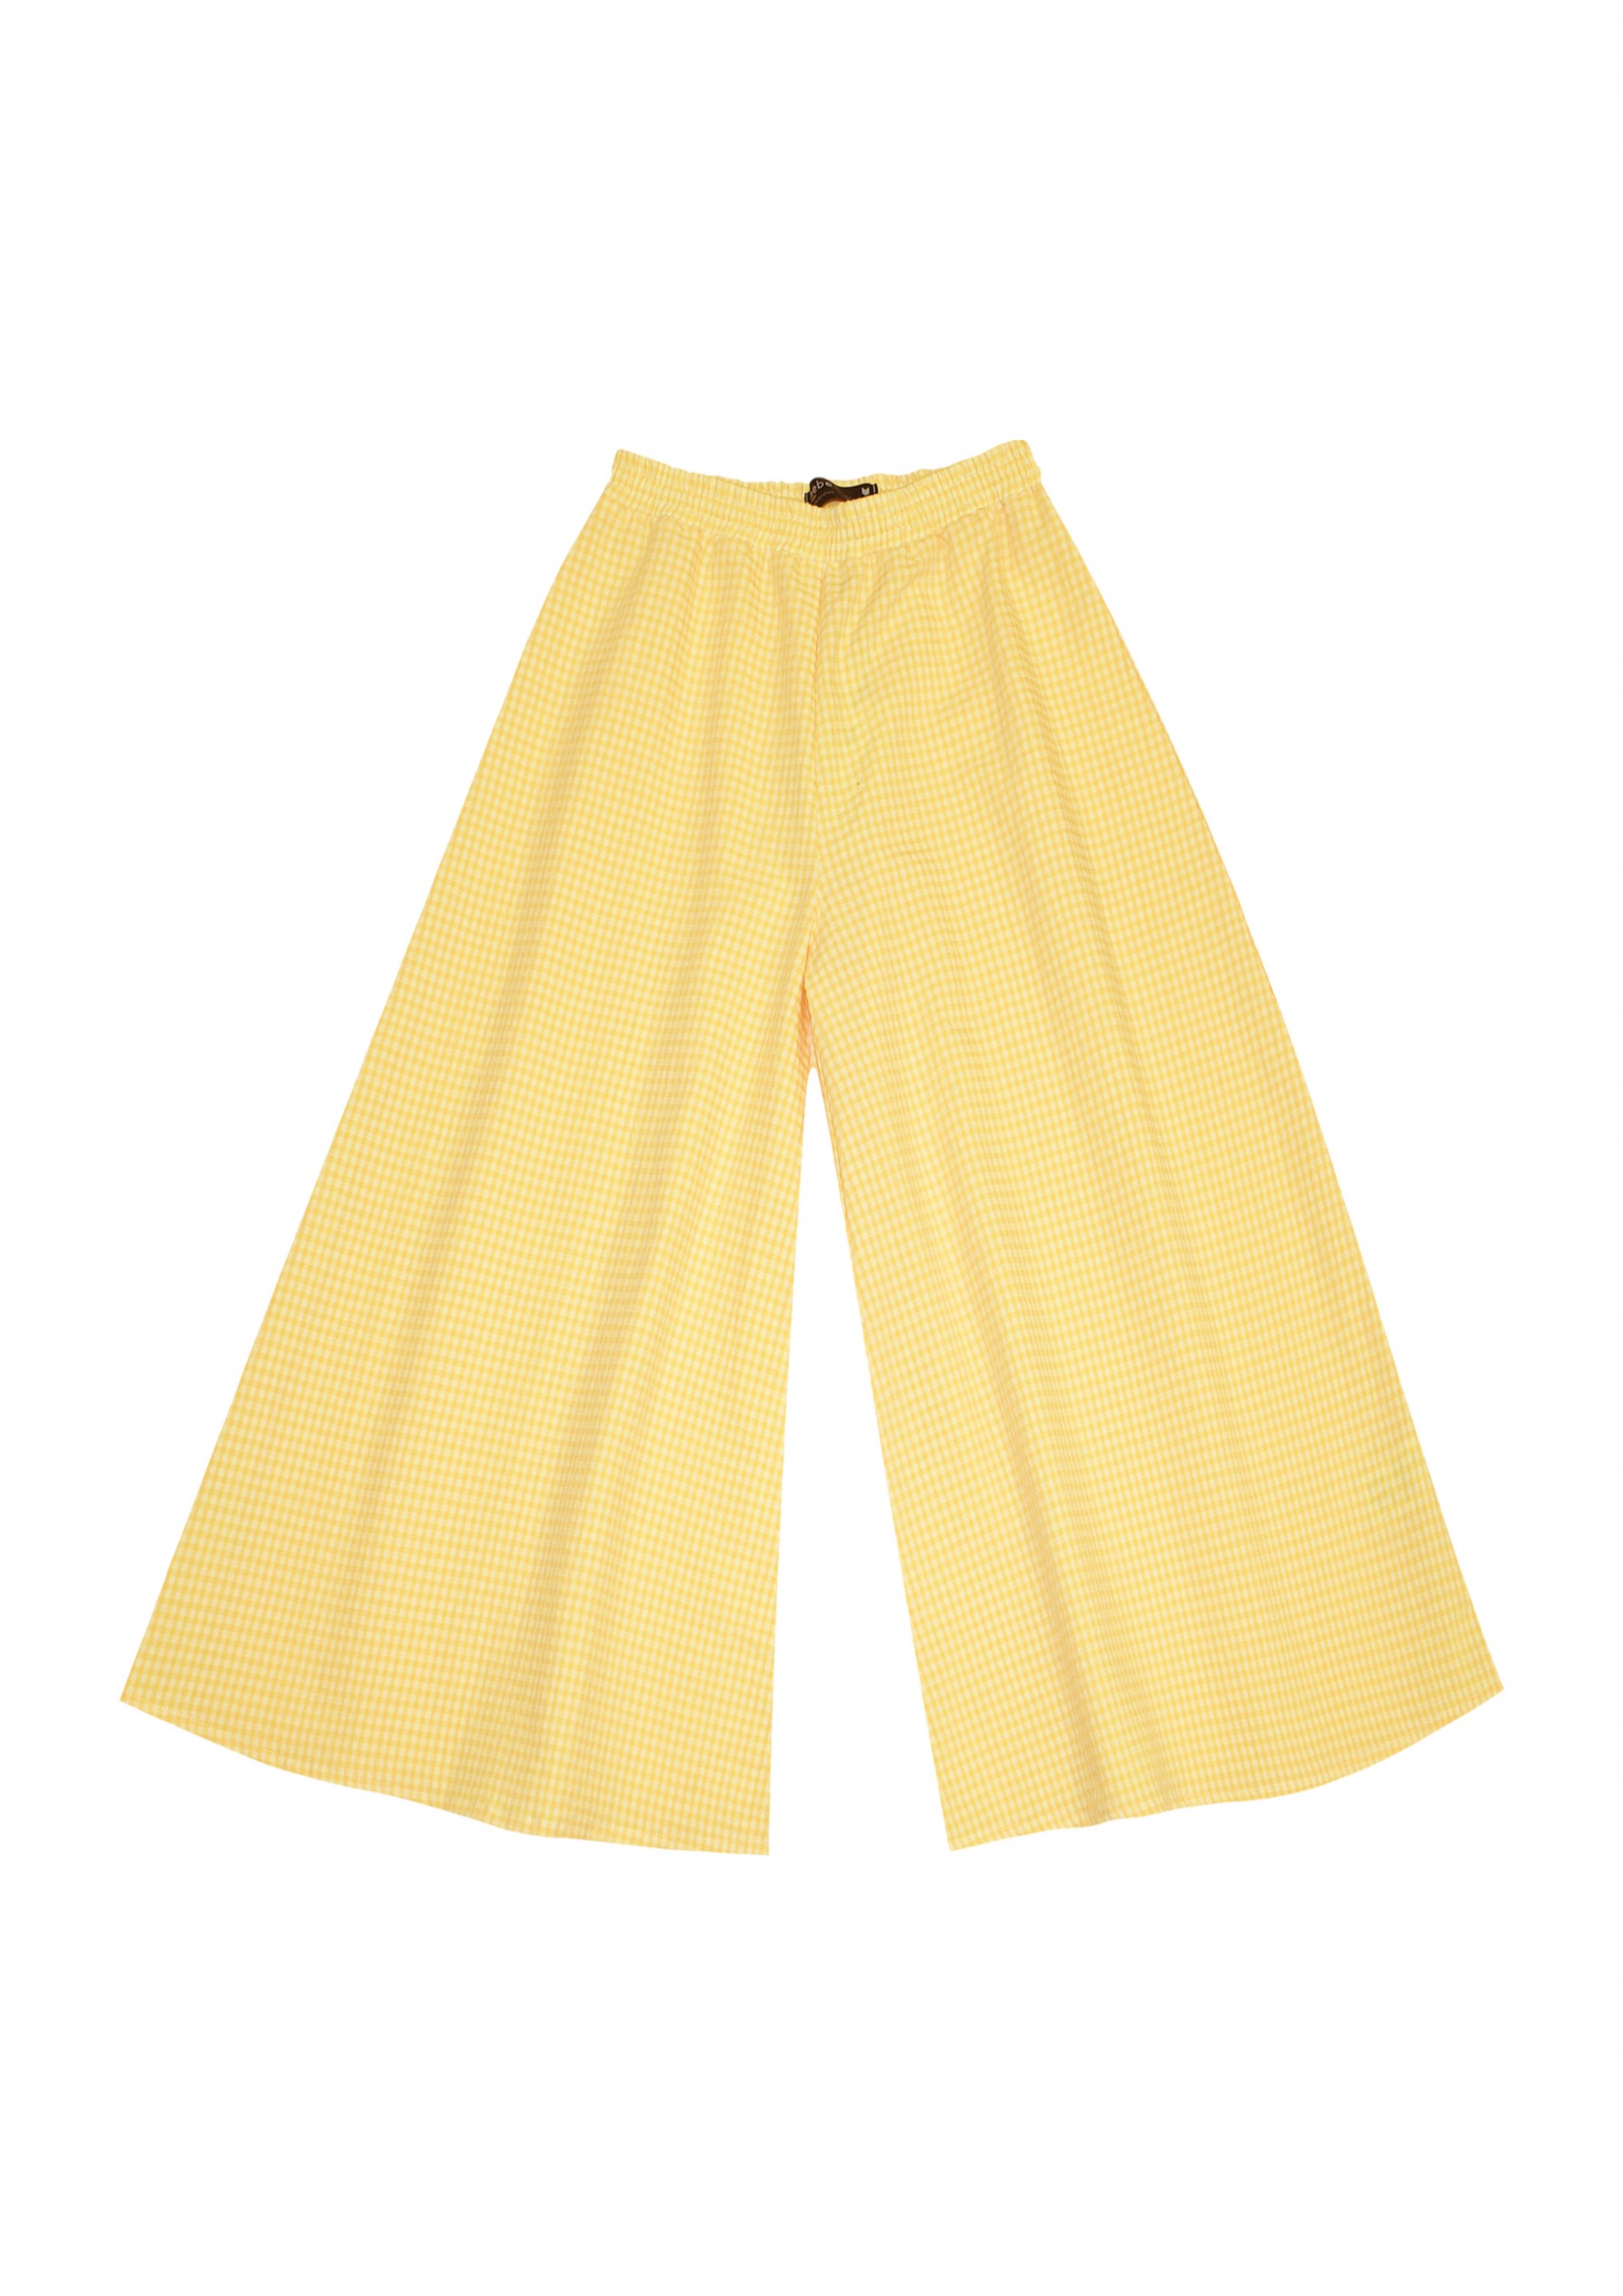 Culottes yellow checkered | HEBE